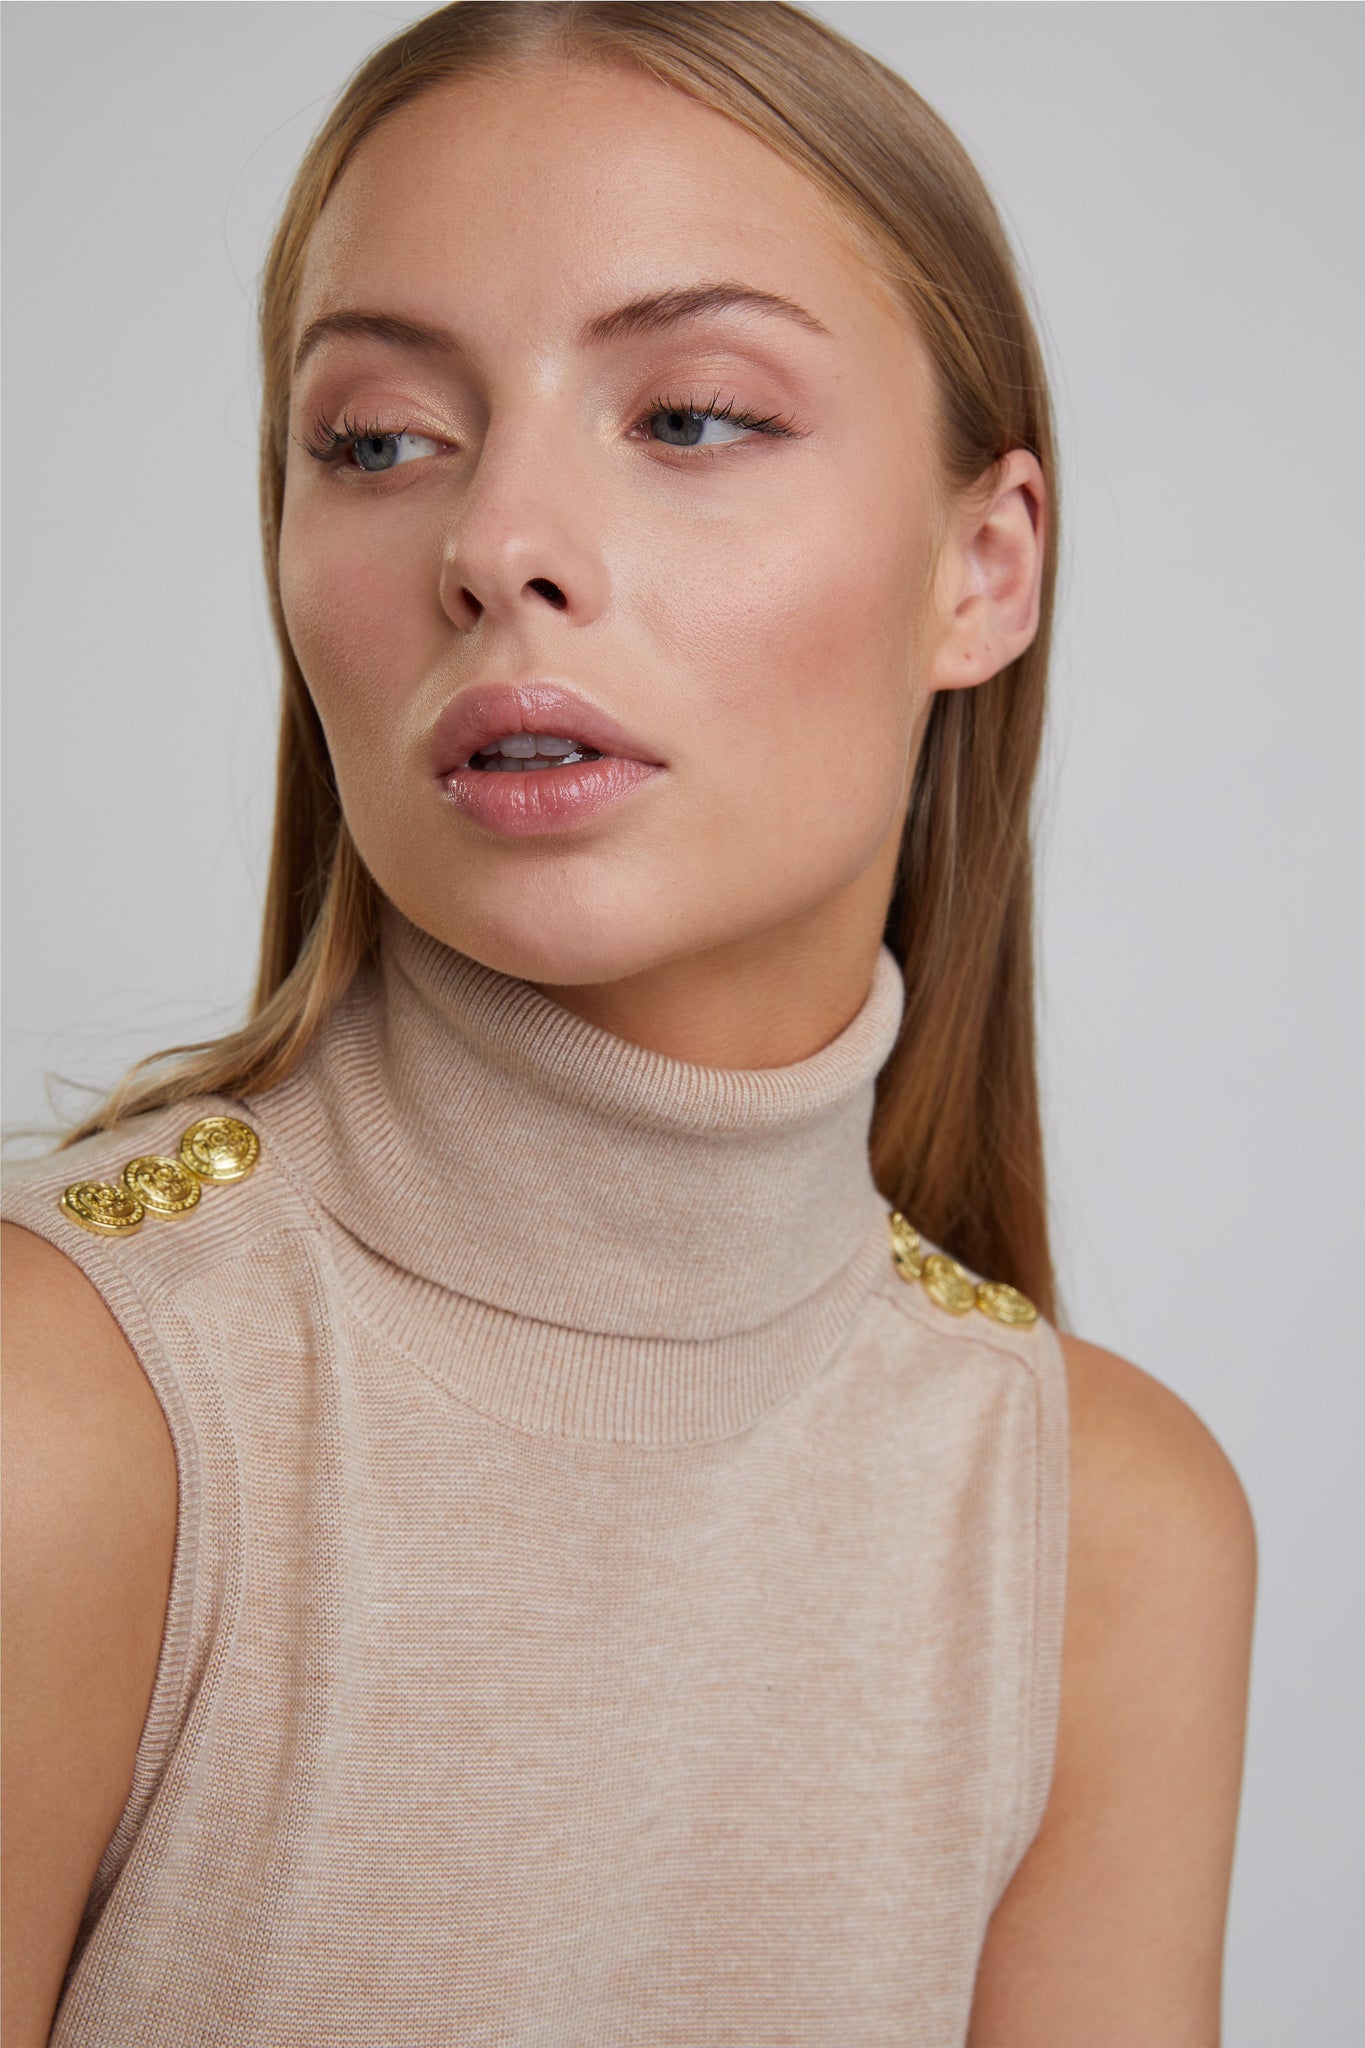 ribbed roll neck detail on fitted lightweight sleeveless rollneck knit in camel with gold button detail across shoulders